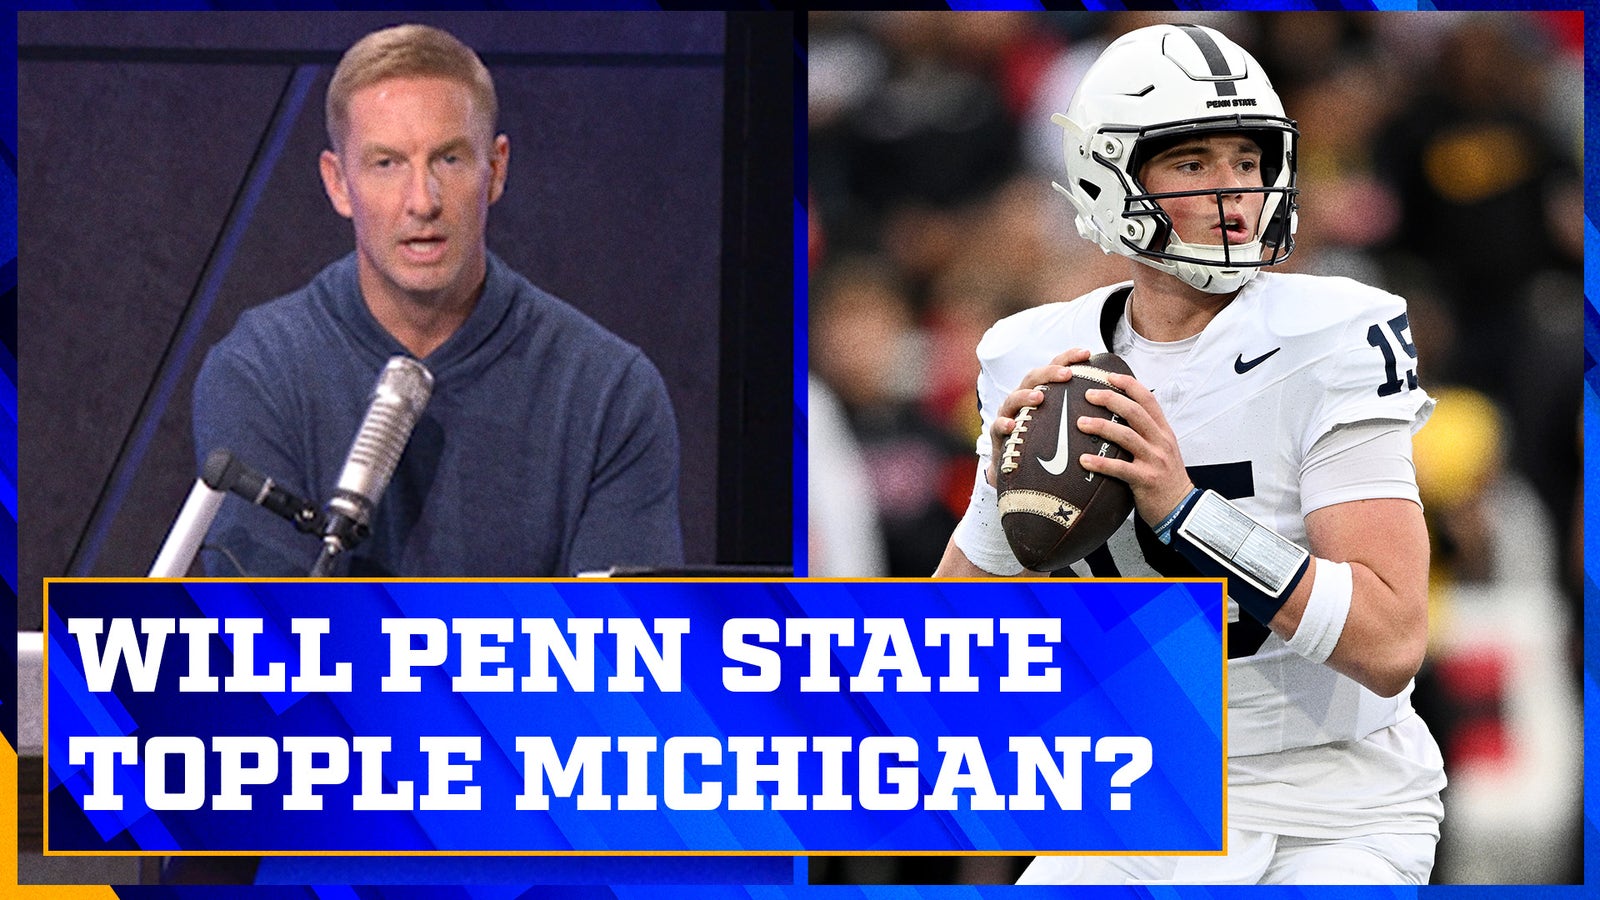 Will Penn State hand Michigan its first loss of the season?